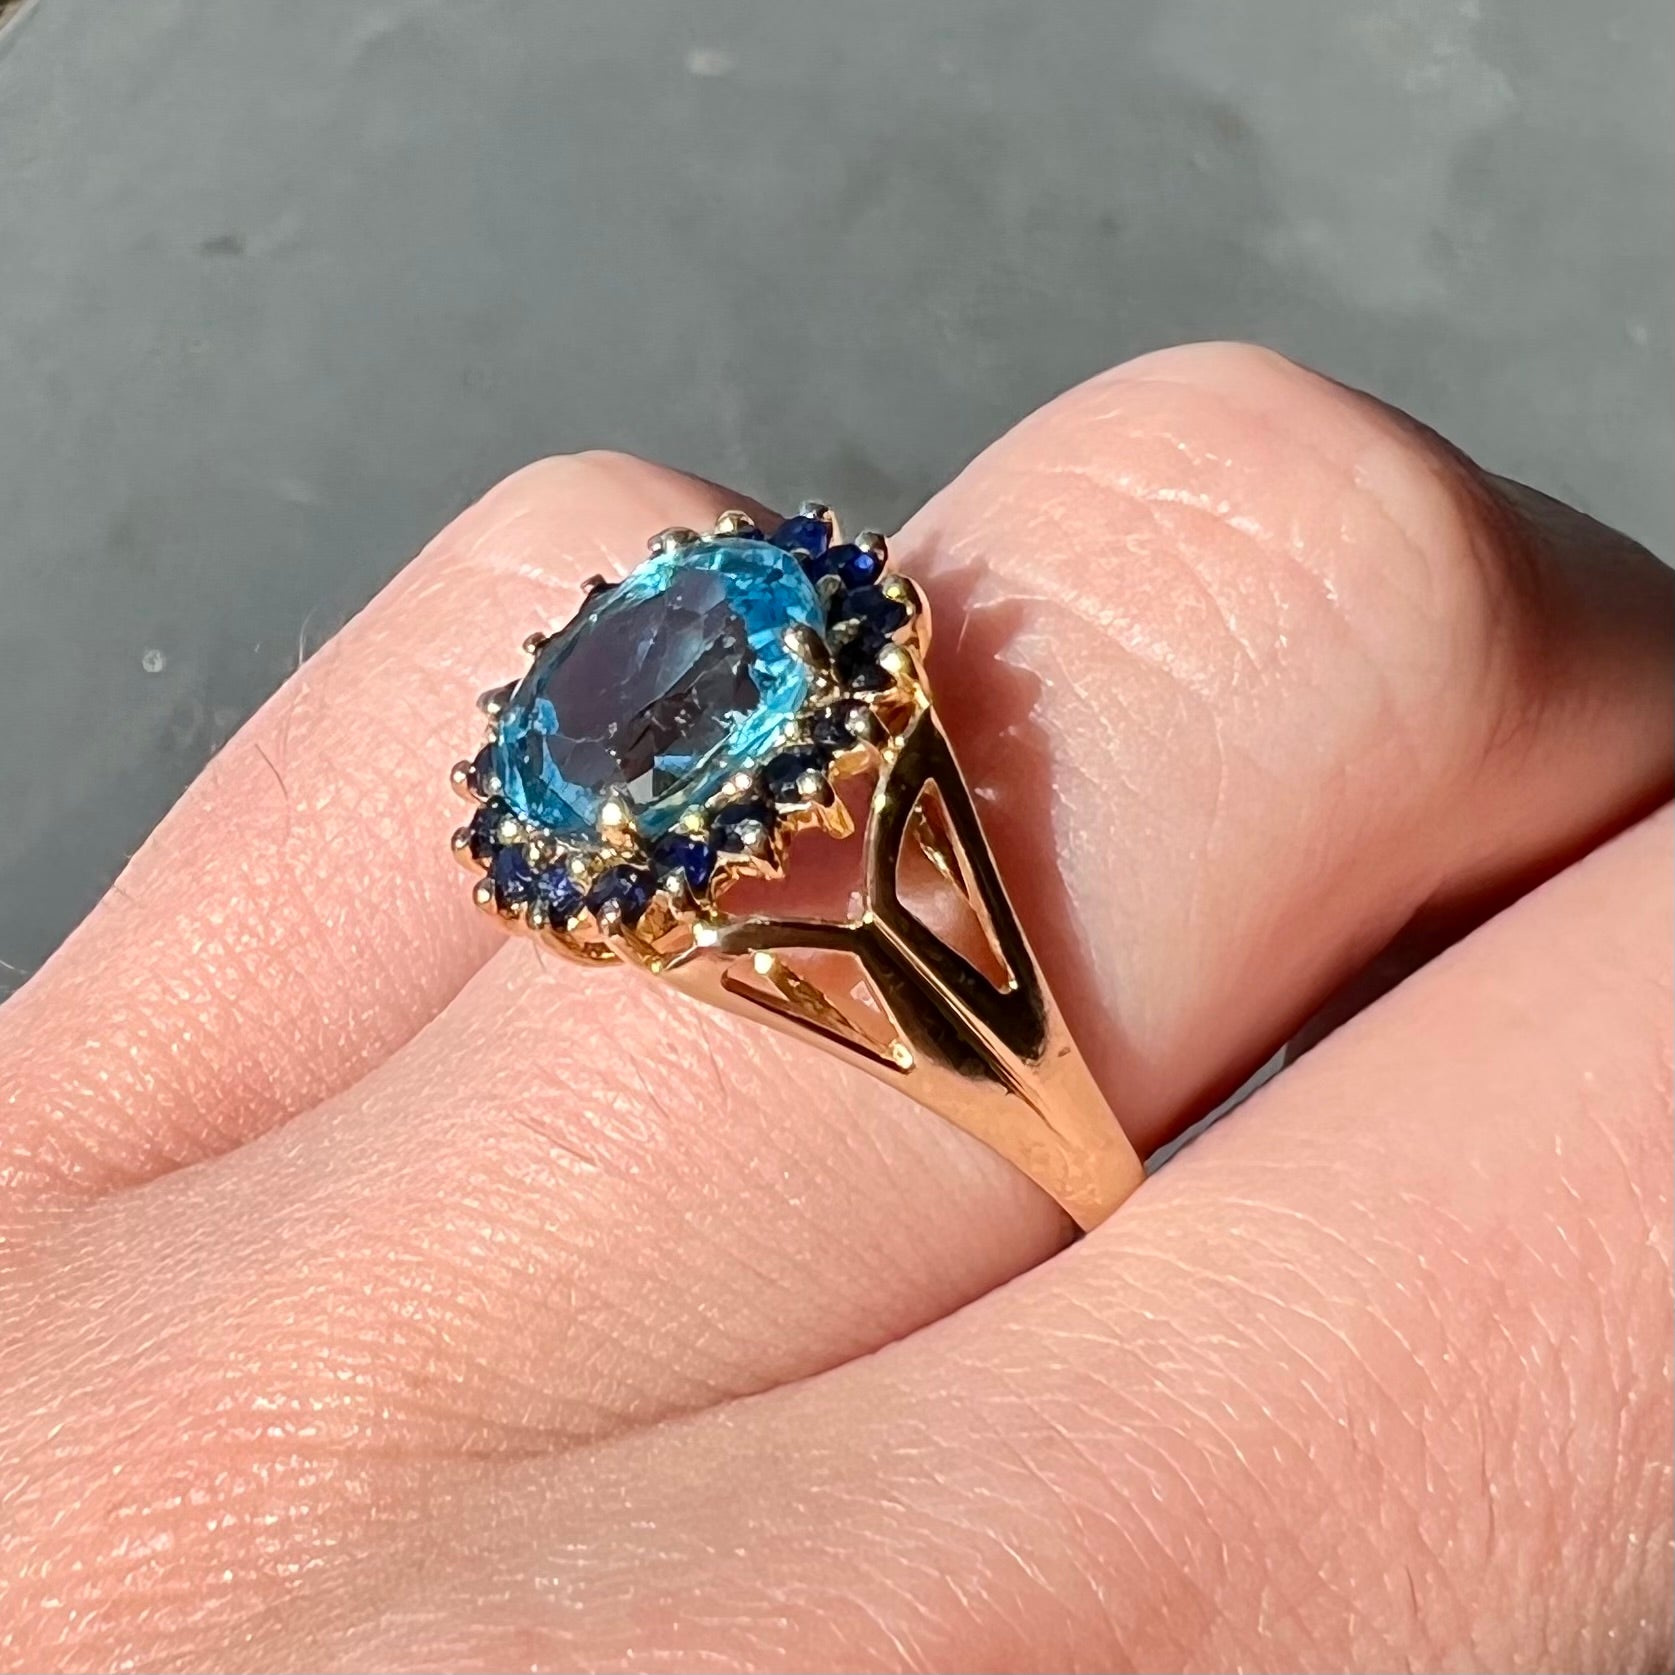 Yellow gold ring prong set with swiss blue topaz center stone and a halo of blue round blue sapphires.